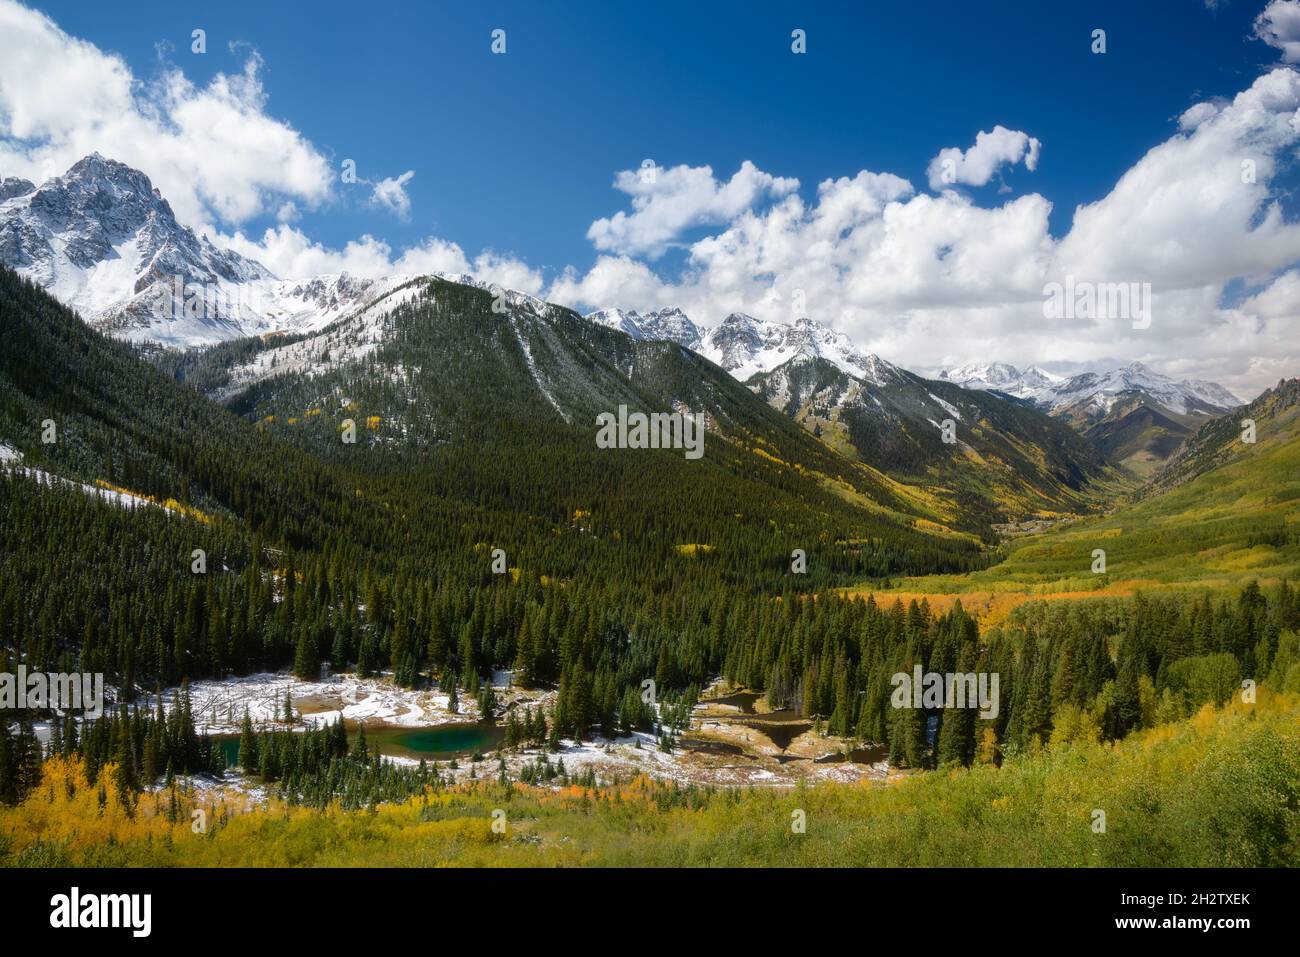 Beautiful landscape photo of aspen and pine trees in valley, Snow covered on mountain range Colorado Stock Photo